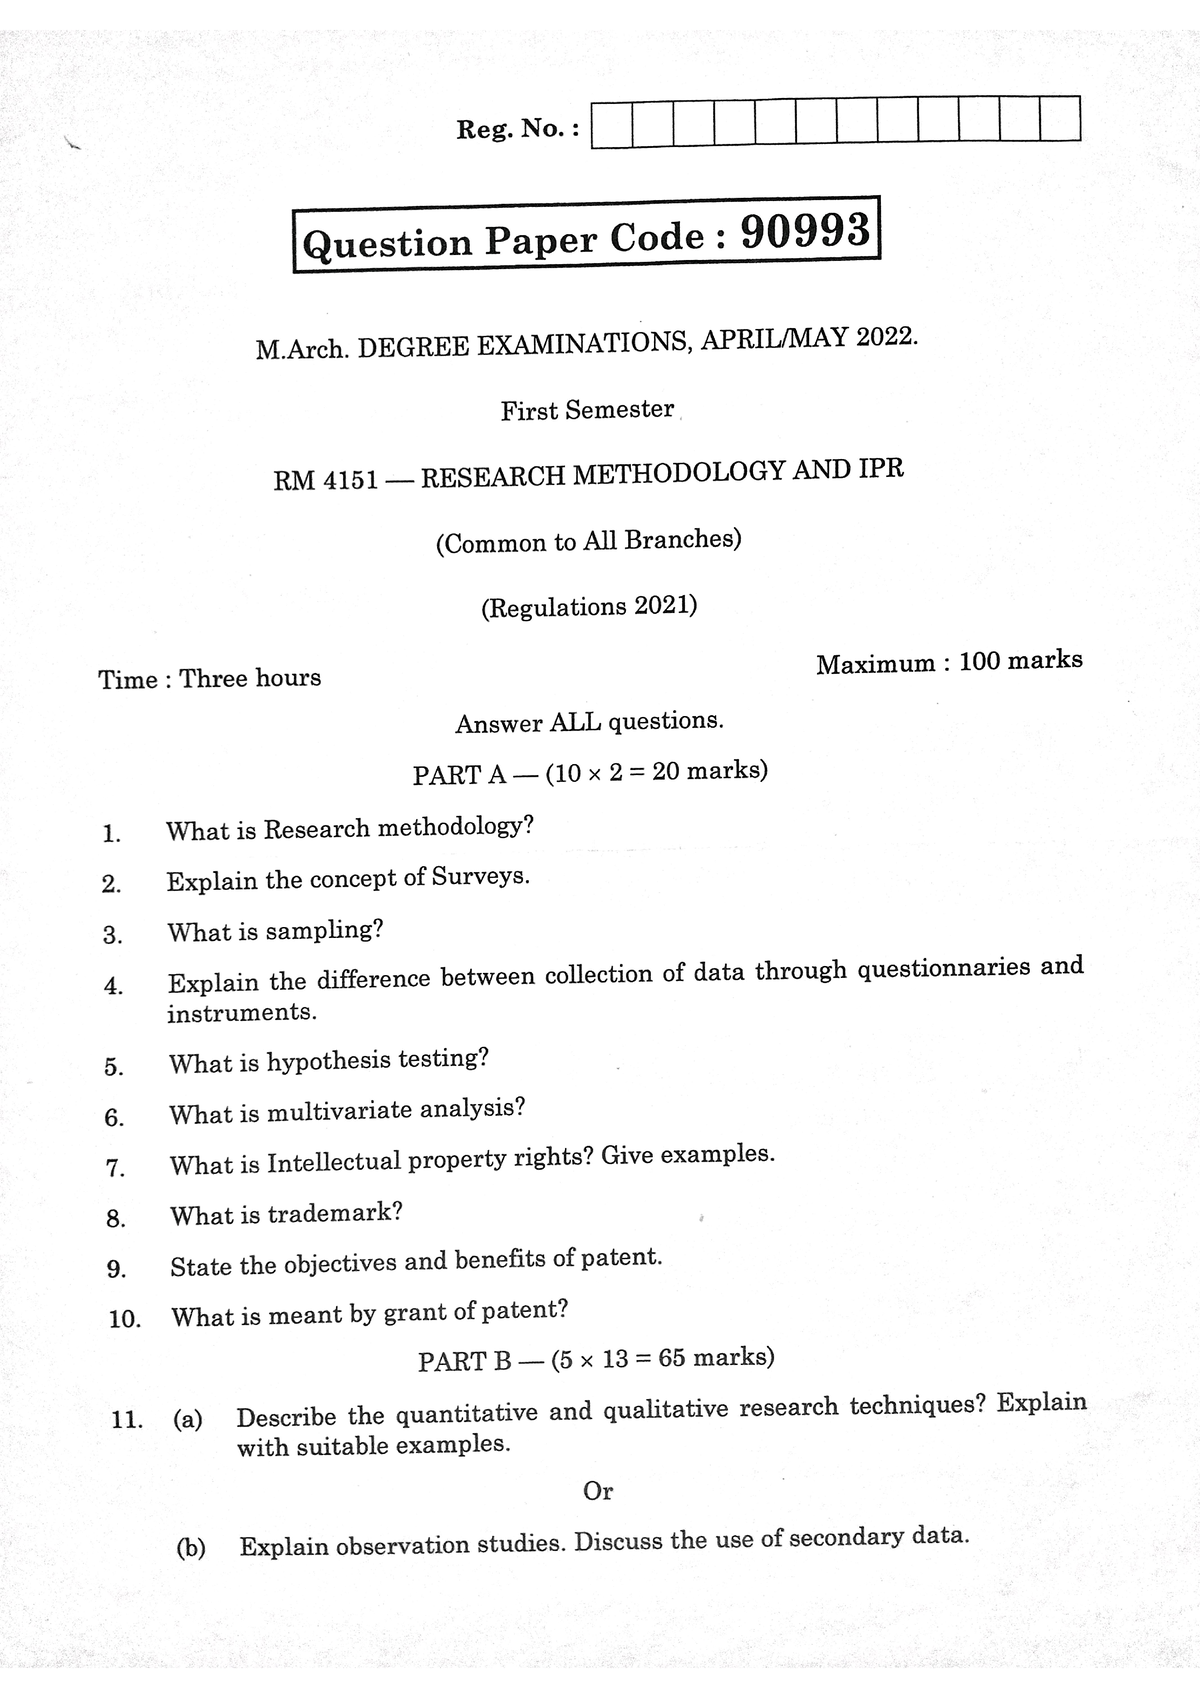 research methodology and ipr vtu question paper